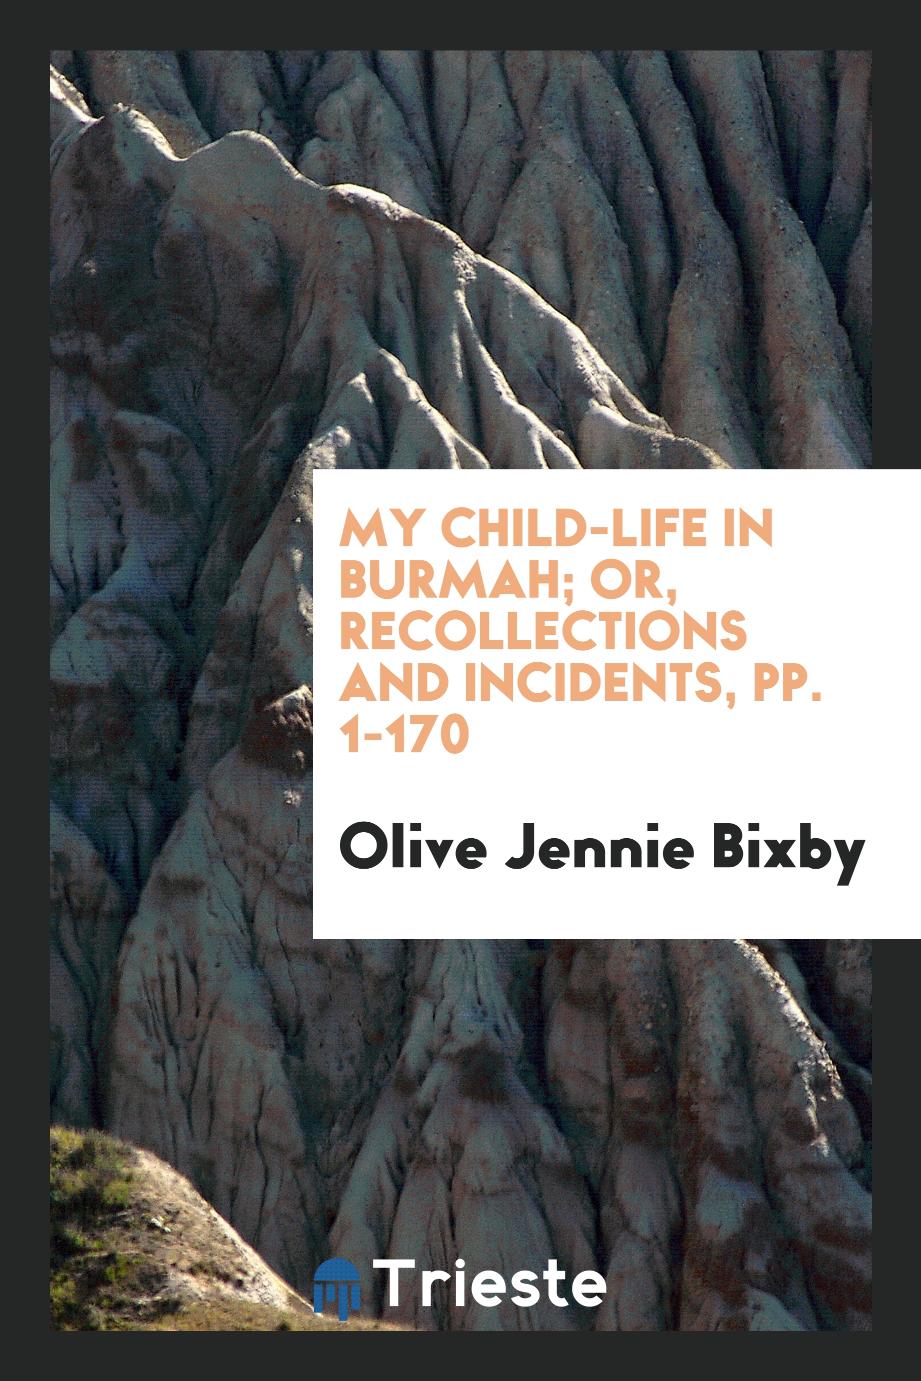 My Child-Life in Burmah; Or, Recollections and Incidents, pp. 1-170